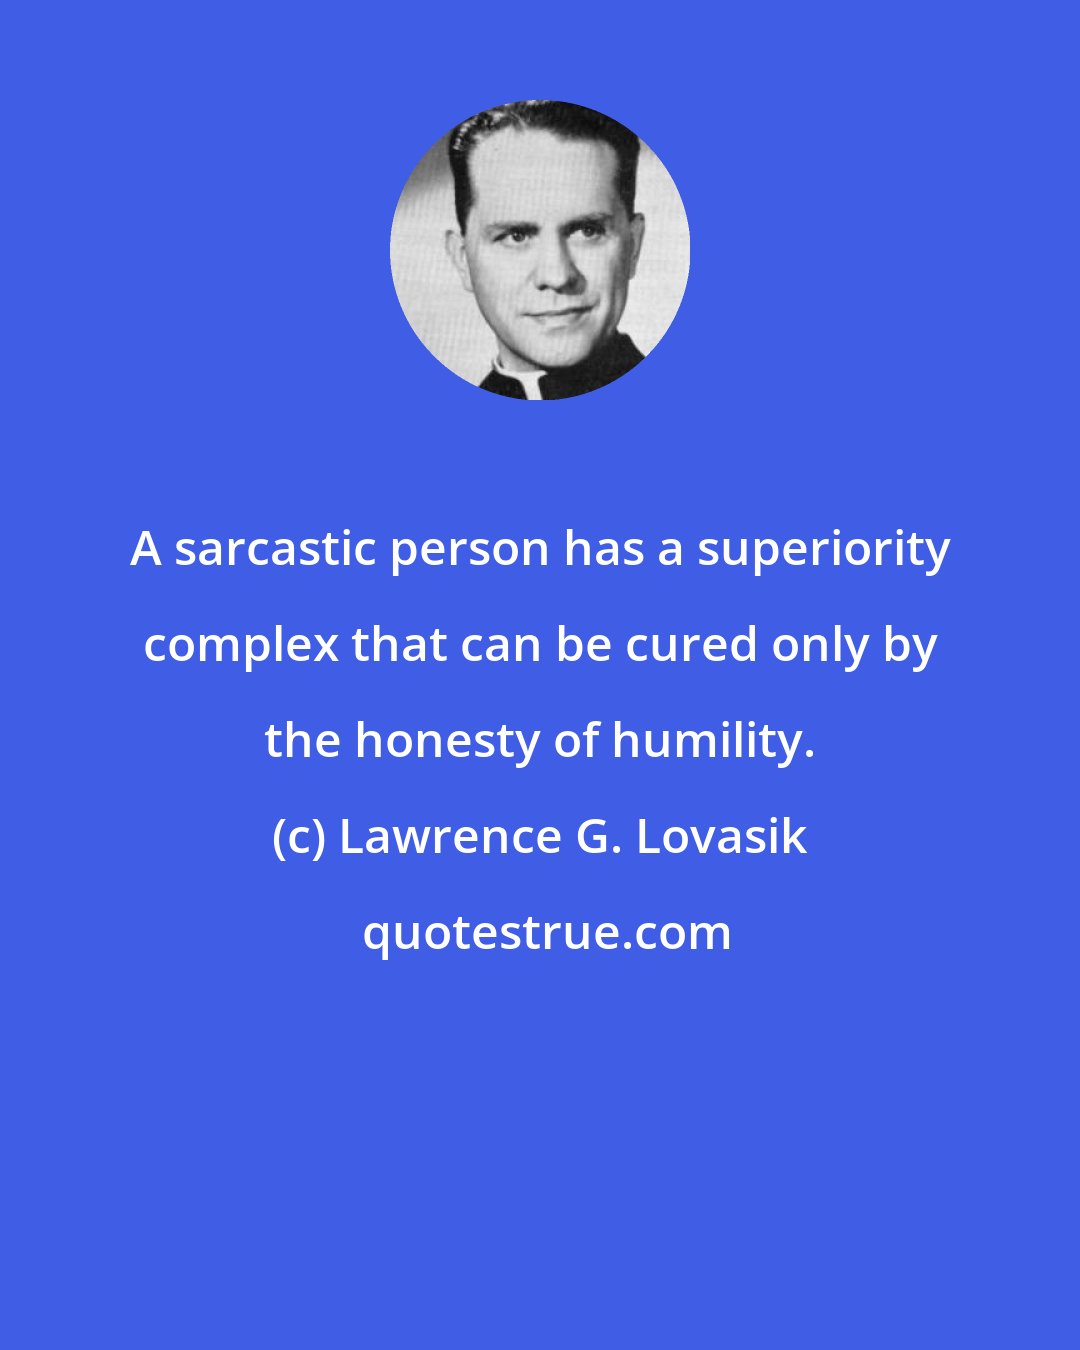 Lawrence G. Lovasik: A sarcastic person has a superiority complex that can be cured only by the honesty of humility.